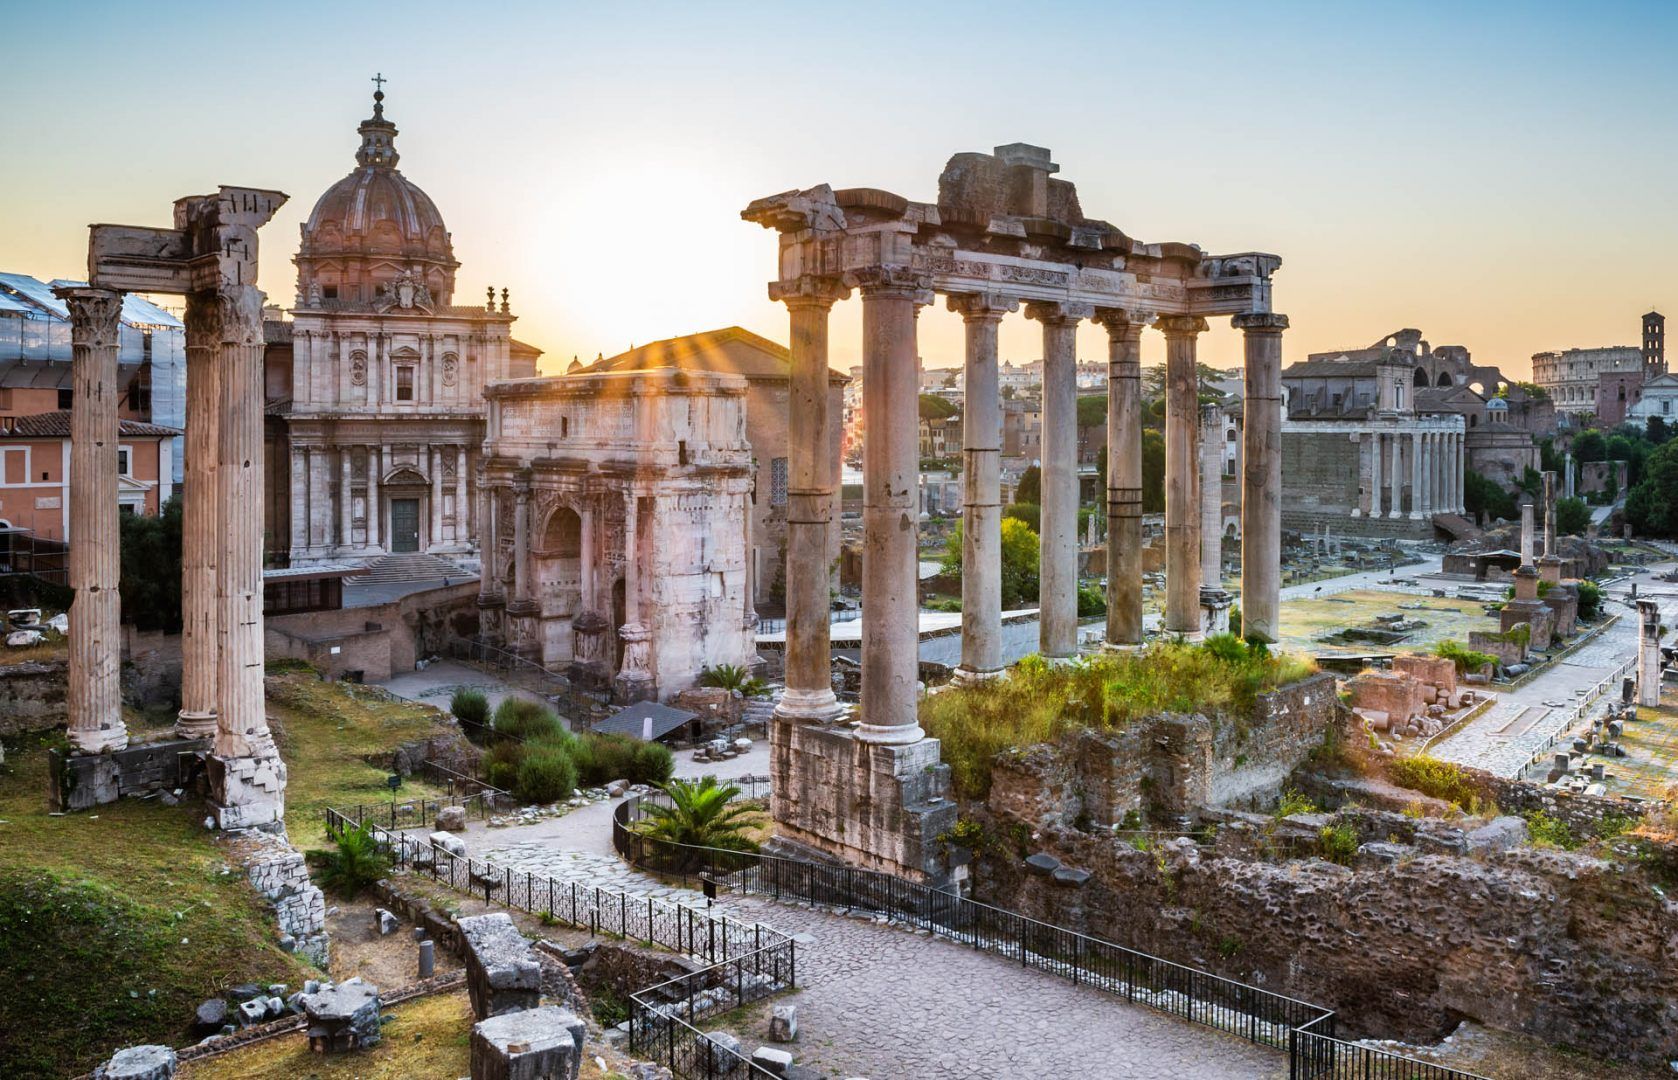 Why should you visit Rome this vacation